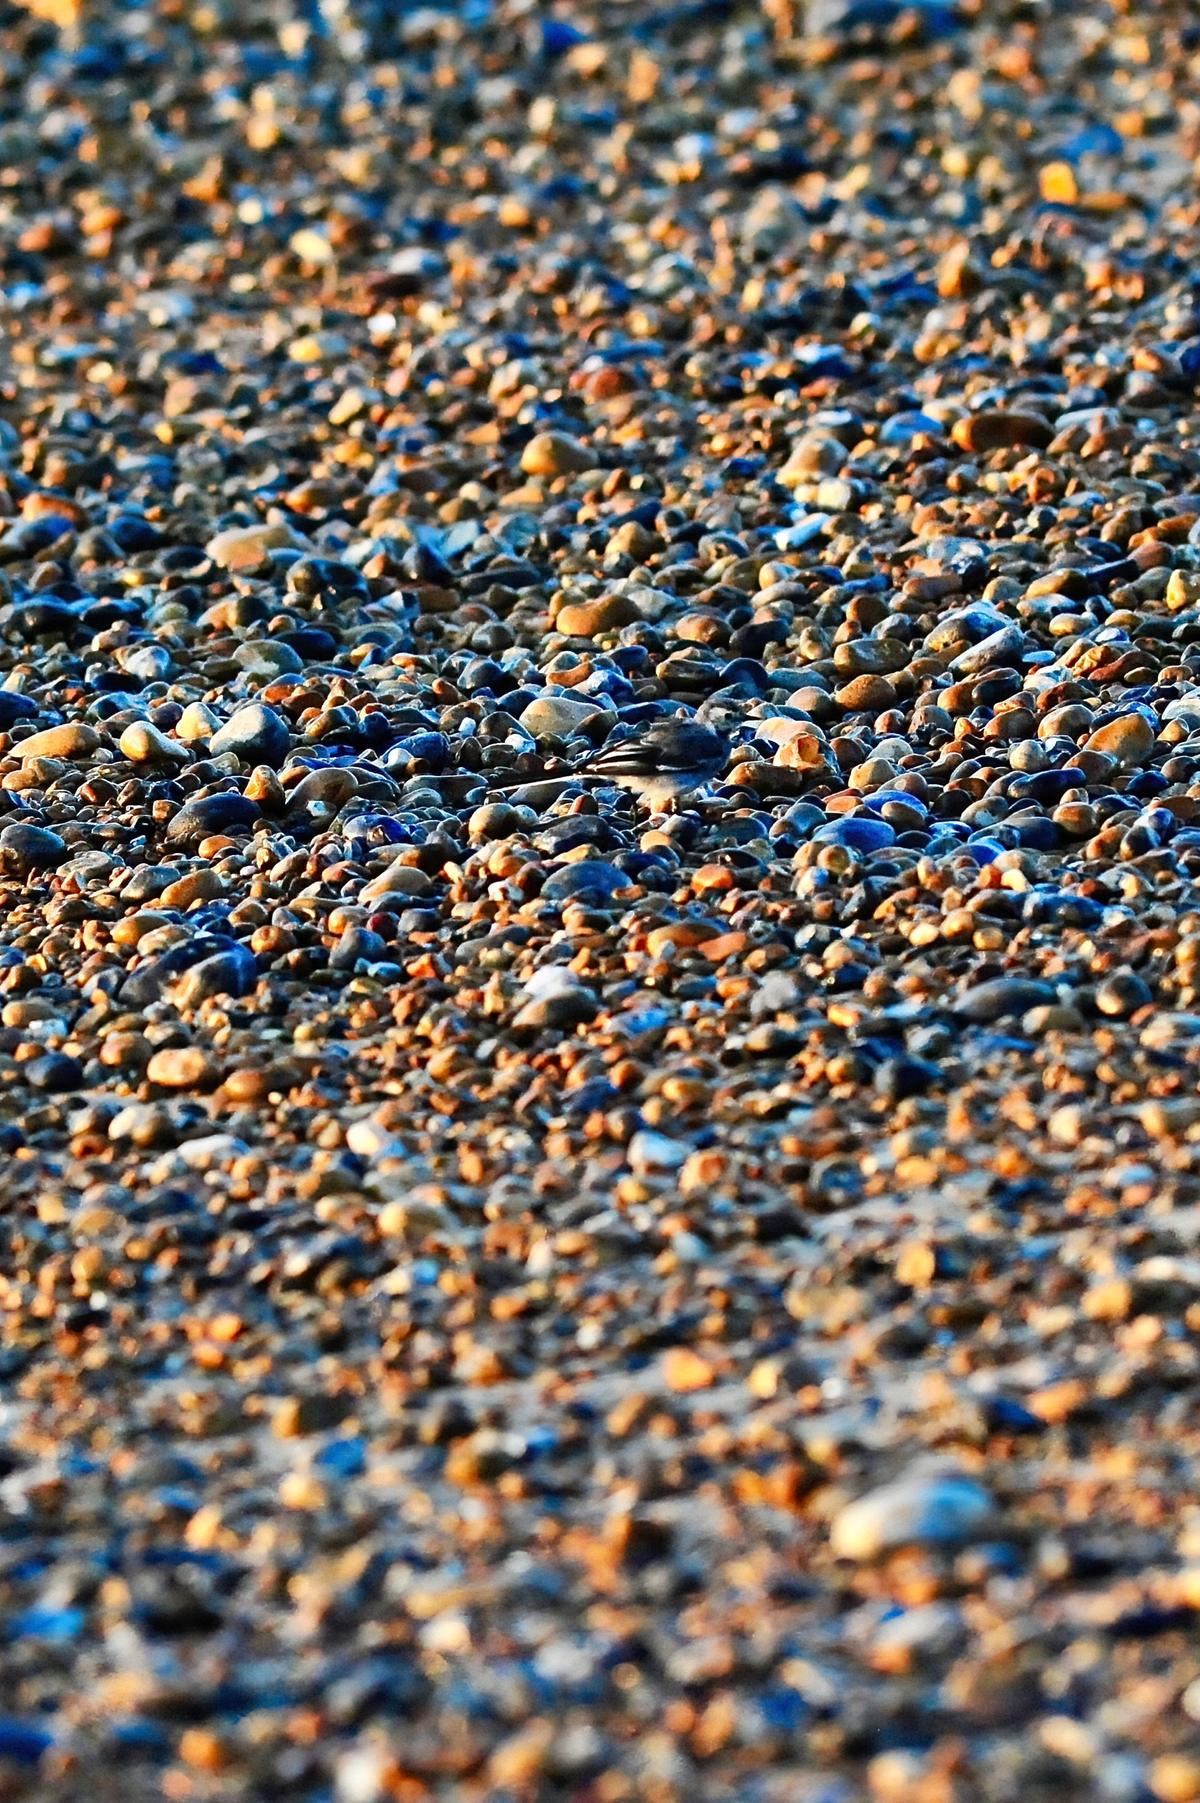 A stealthy bird camouflages on a pebble beach. (Courtesy of Caters News)